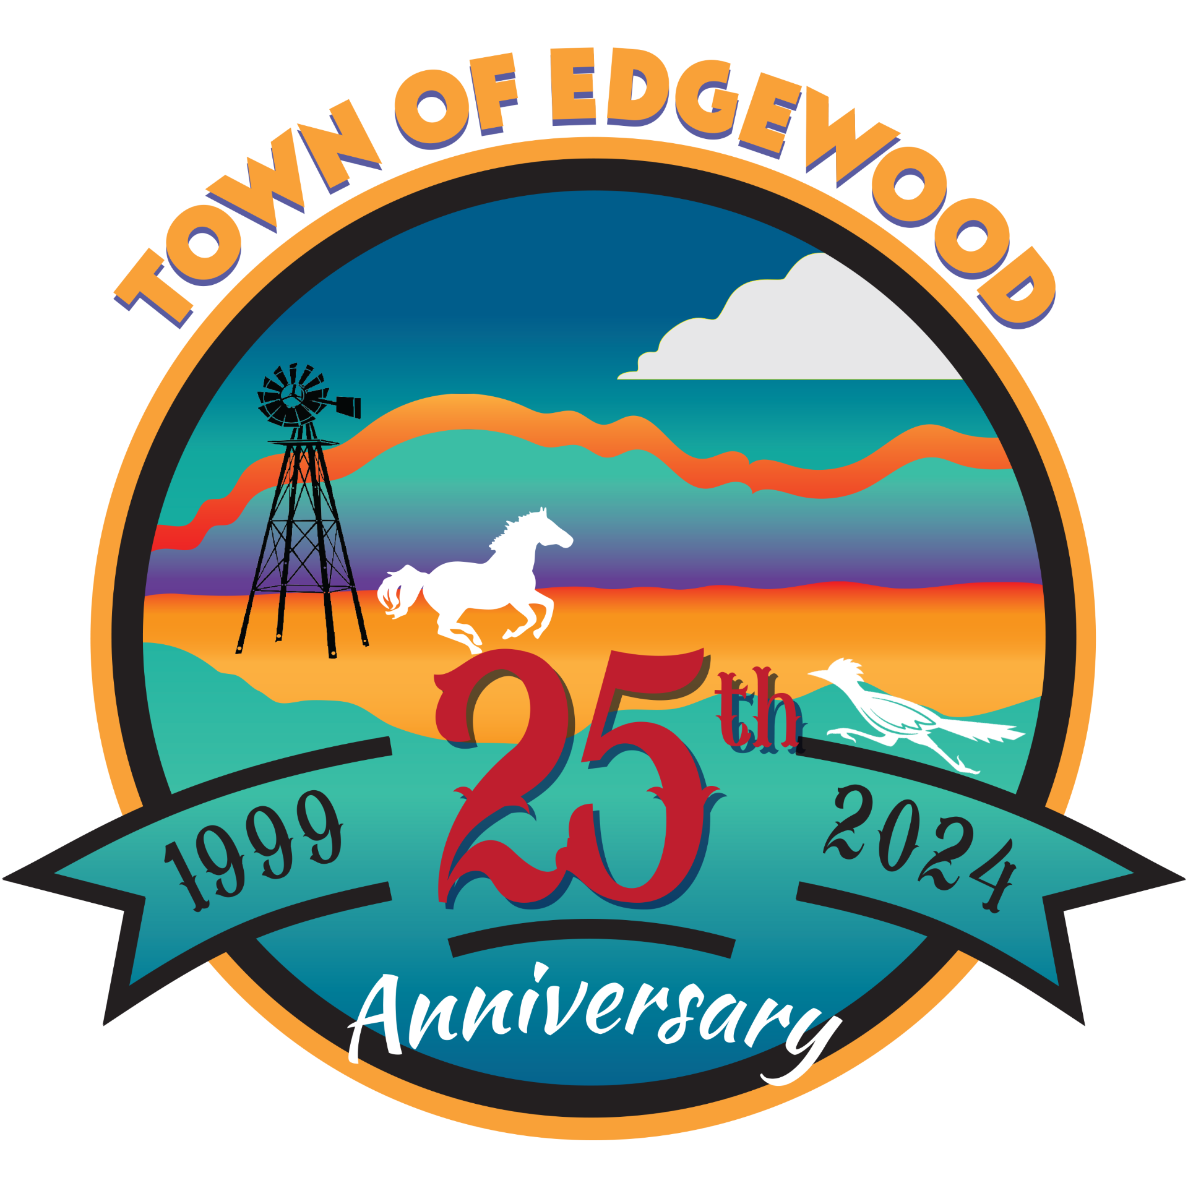 edgewood 25 logo for the town of edgewood new mexico